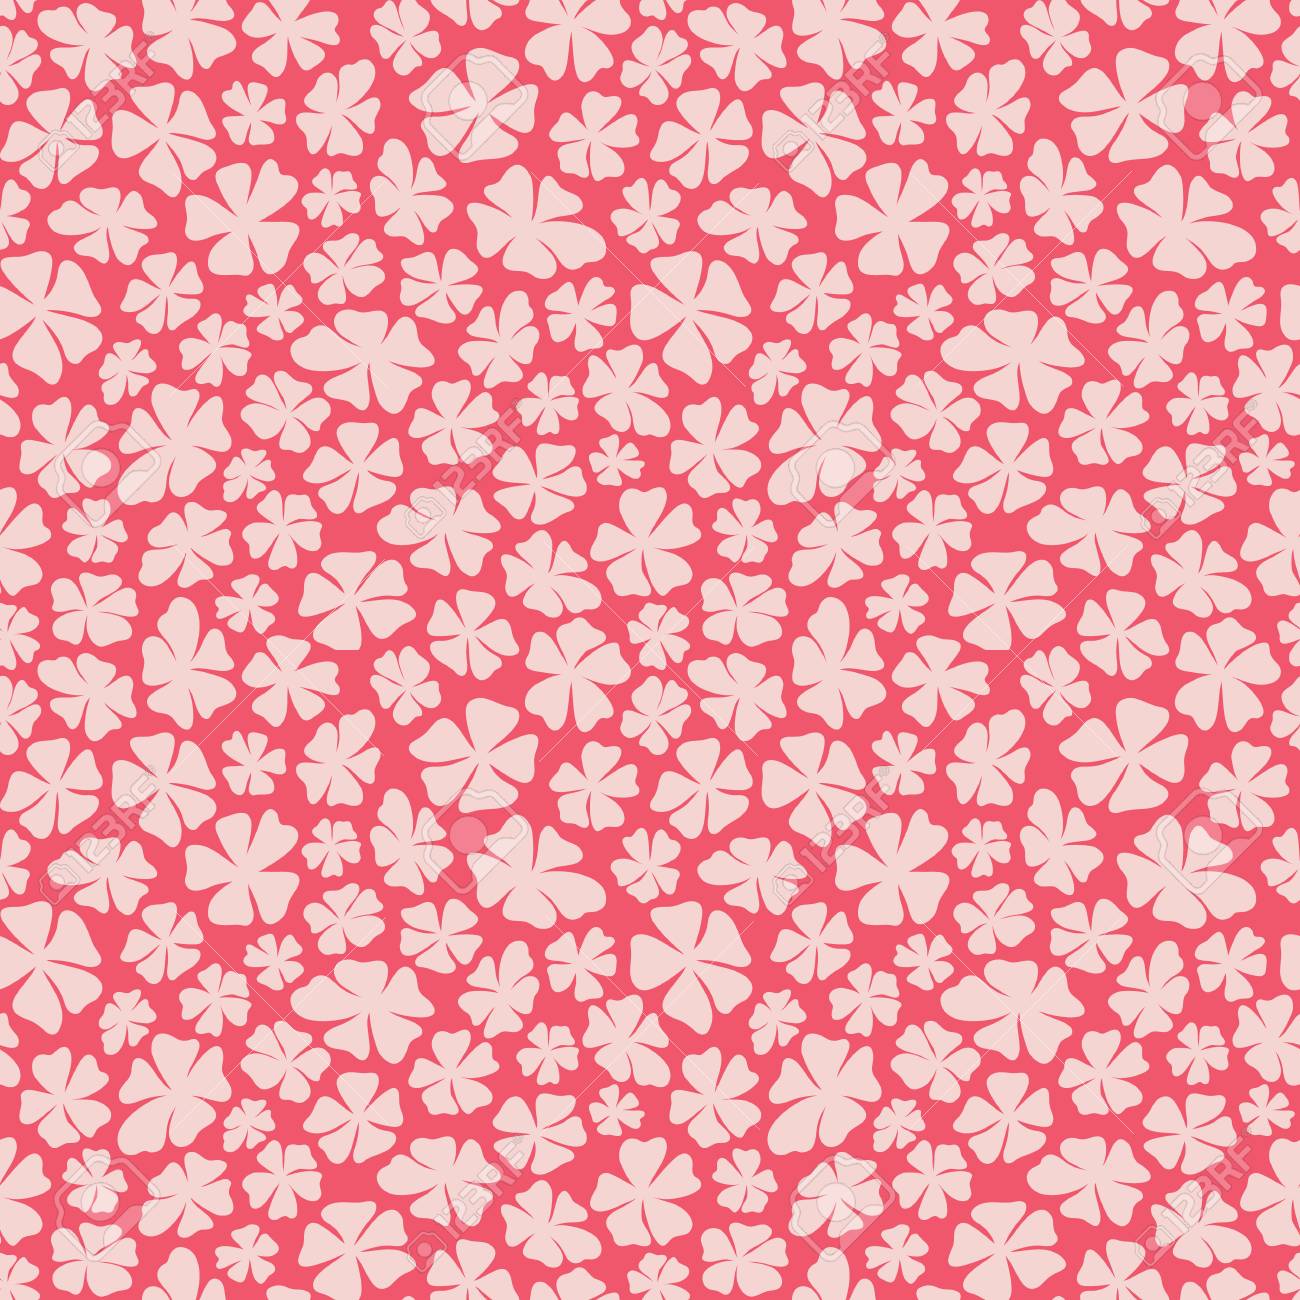 Hand Drawn Ditsy Pink Flowers On A Red Background In Tossed